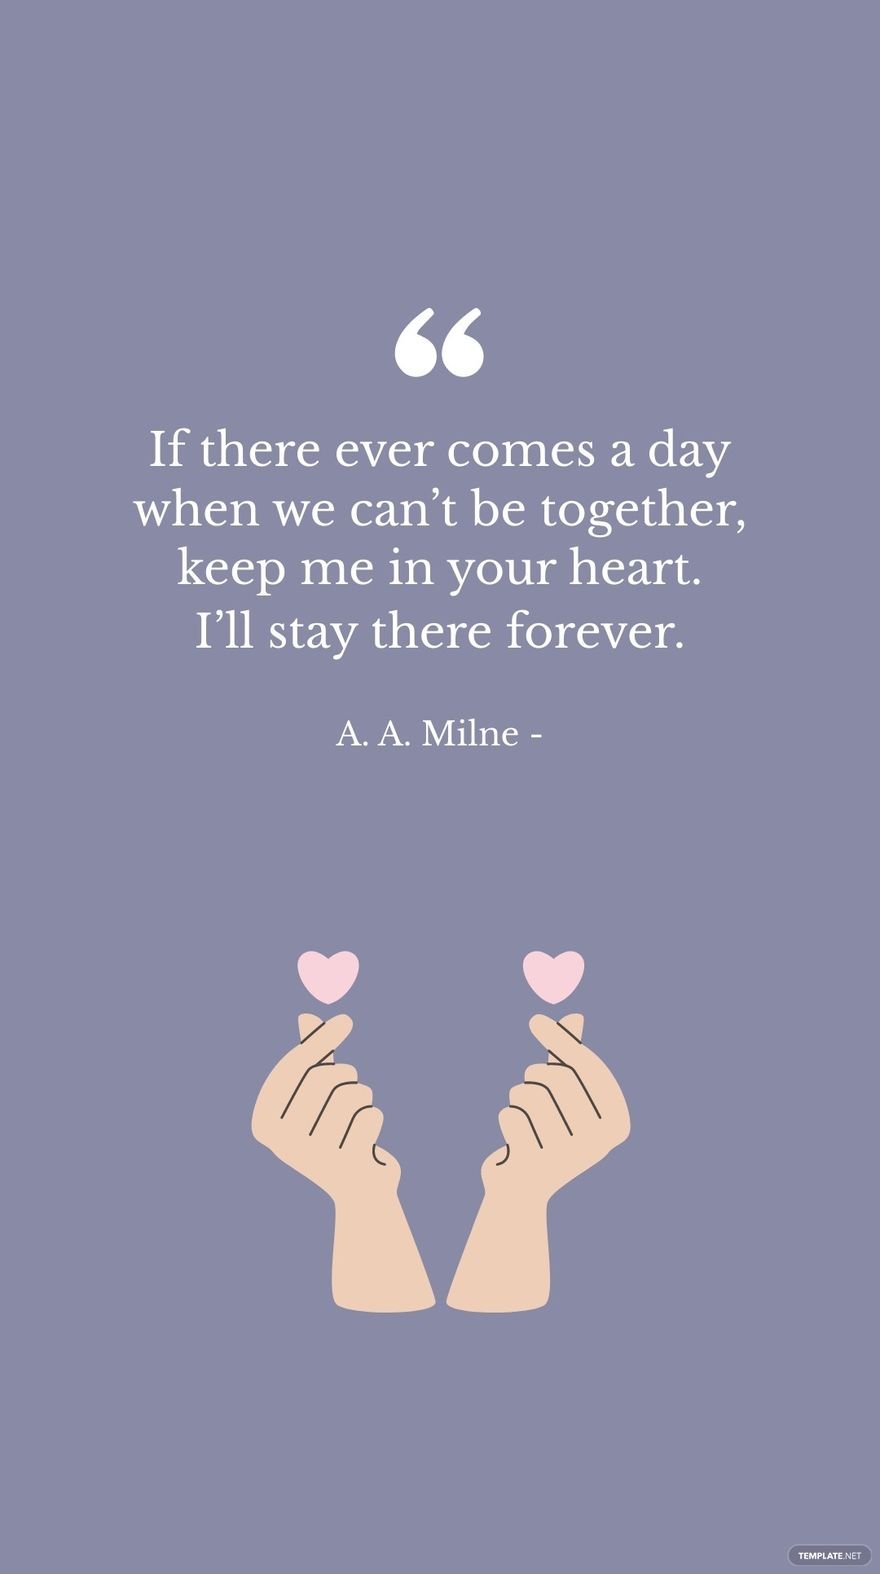 Free A. A. Milne - If there ever comes a day when we can’t be together, keep me in your heart. I’ll stay there forever.